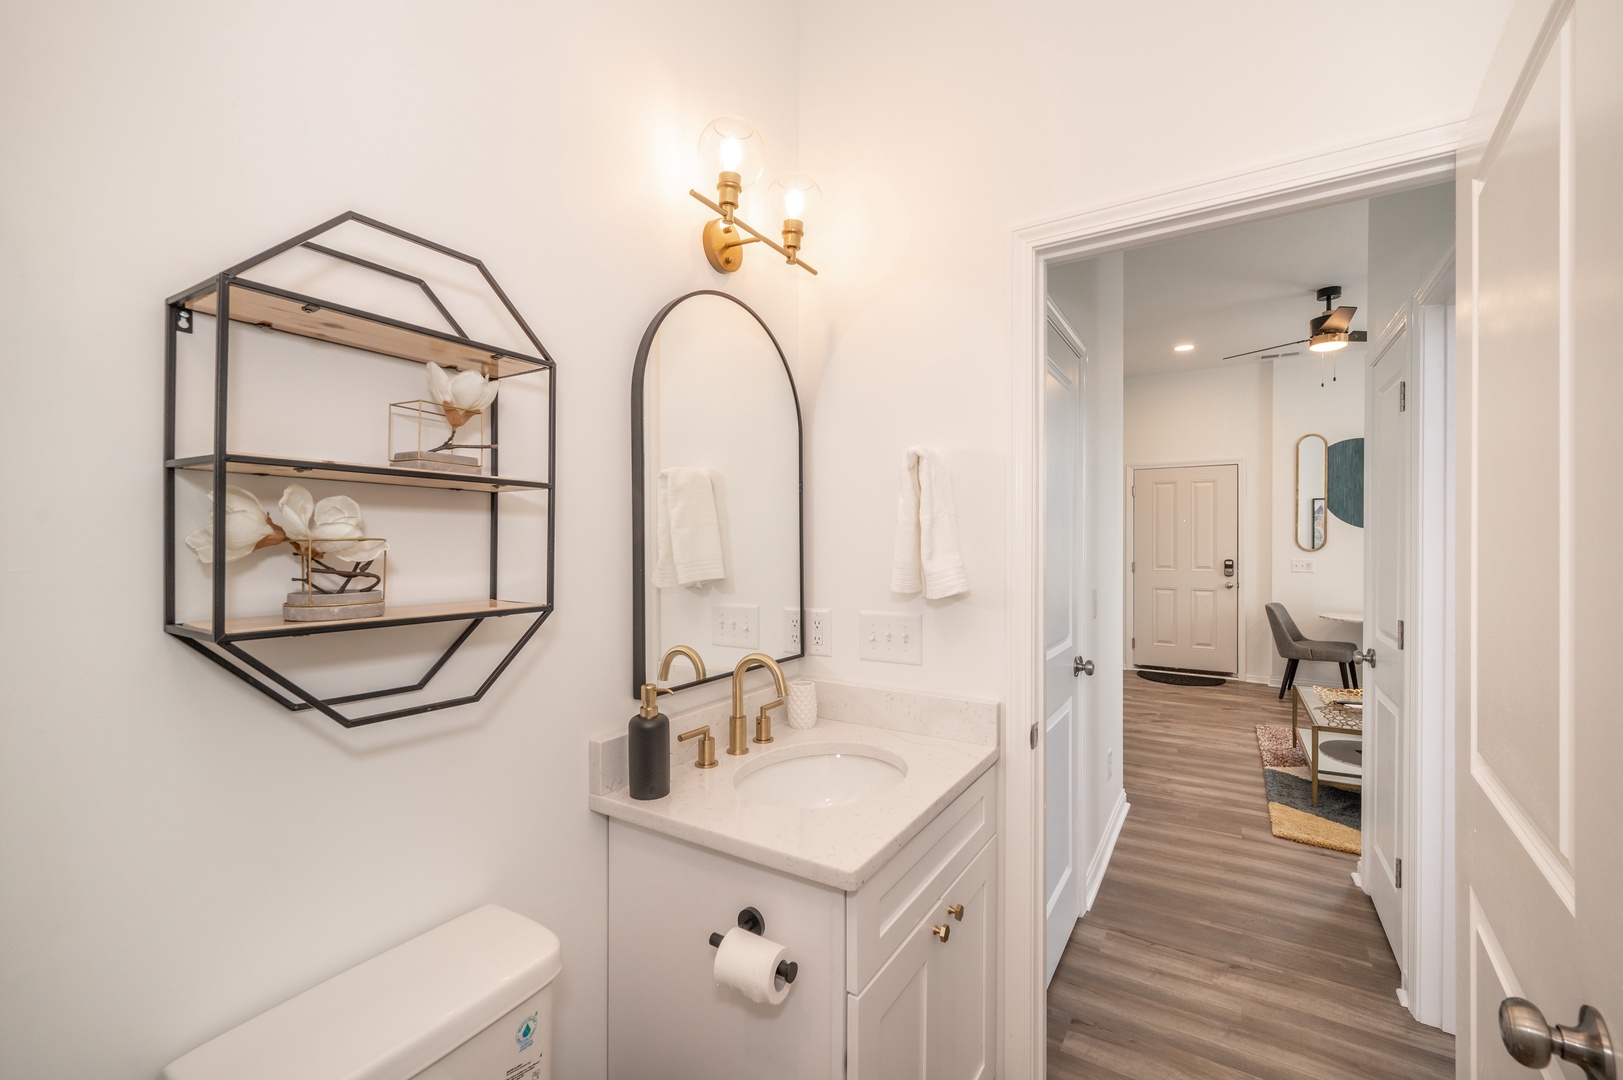 Unit 201: The bathroom offers a chic single vanity and spa-like glass shower